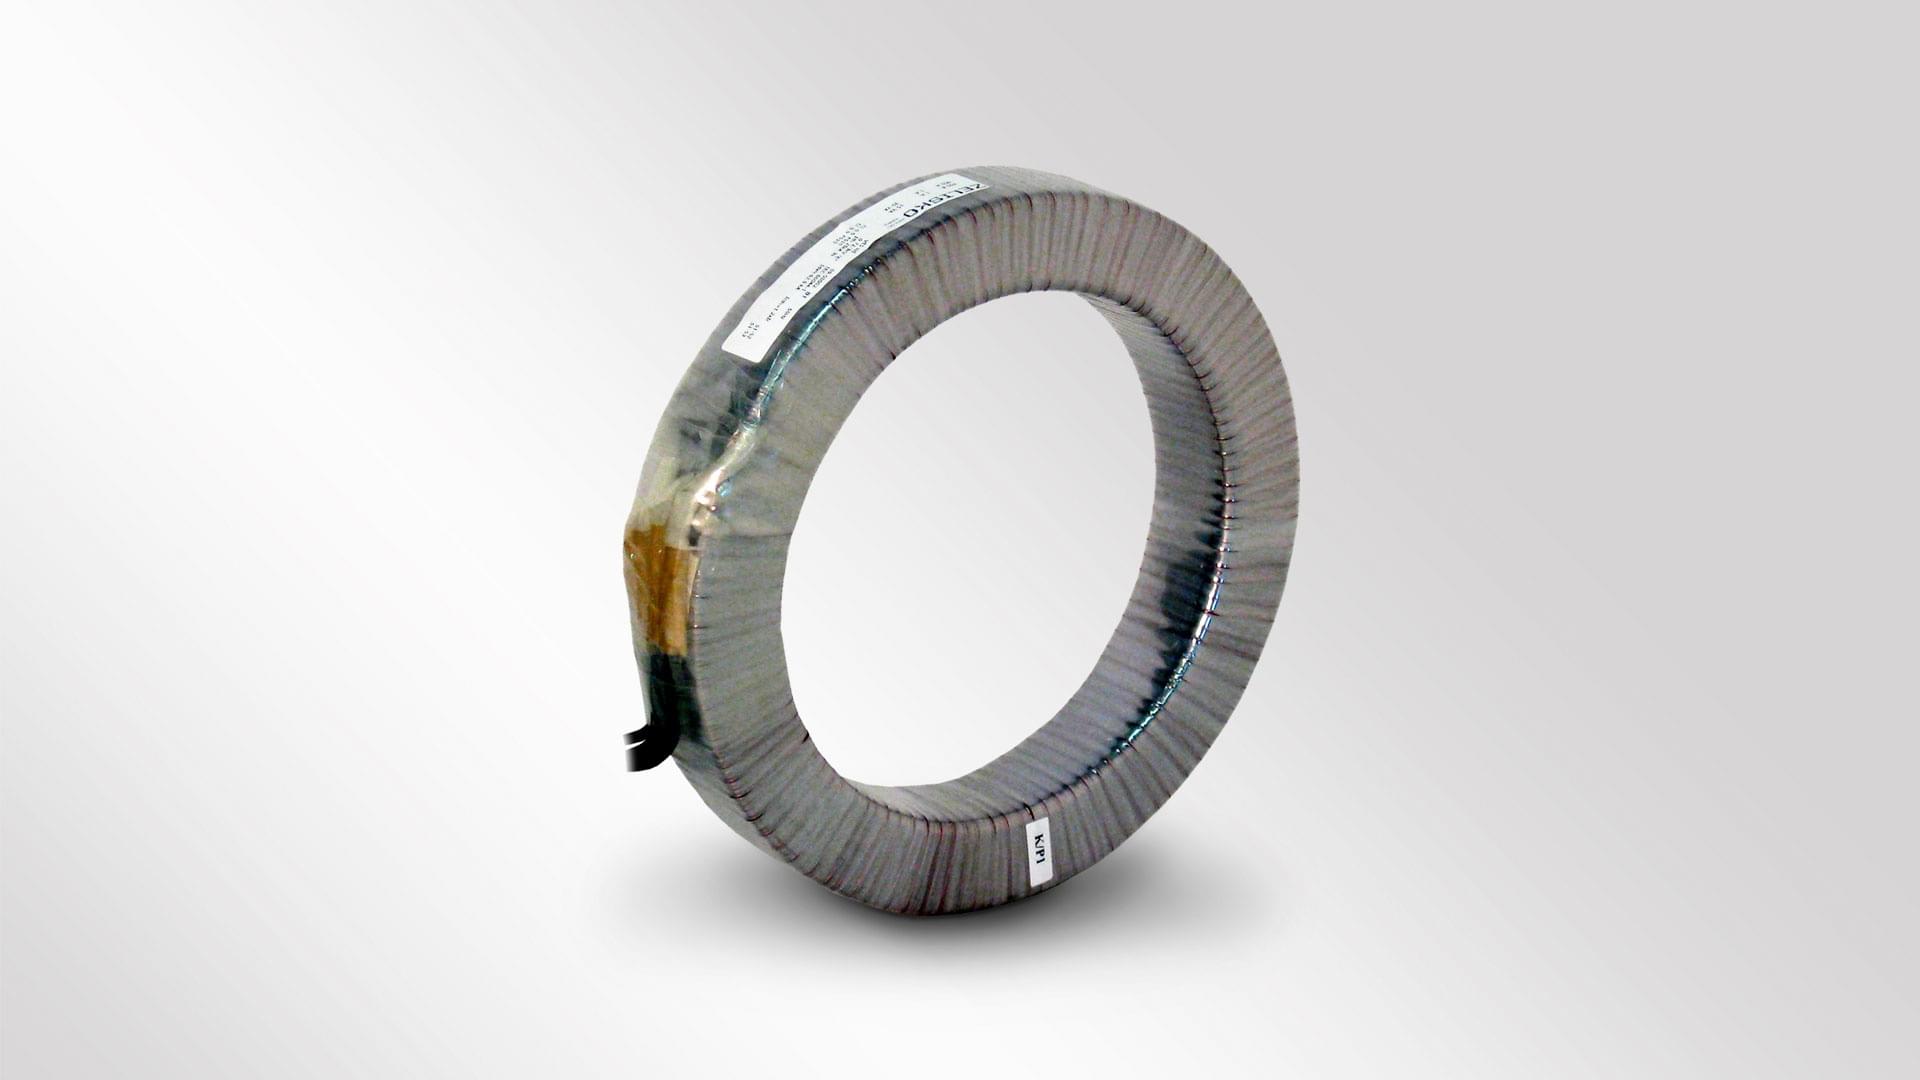 A silver toroidal current transformer that is installed in high-voltage transformers and can be used for decades without maintenance